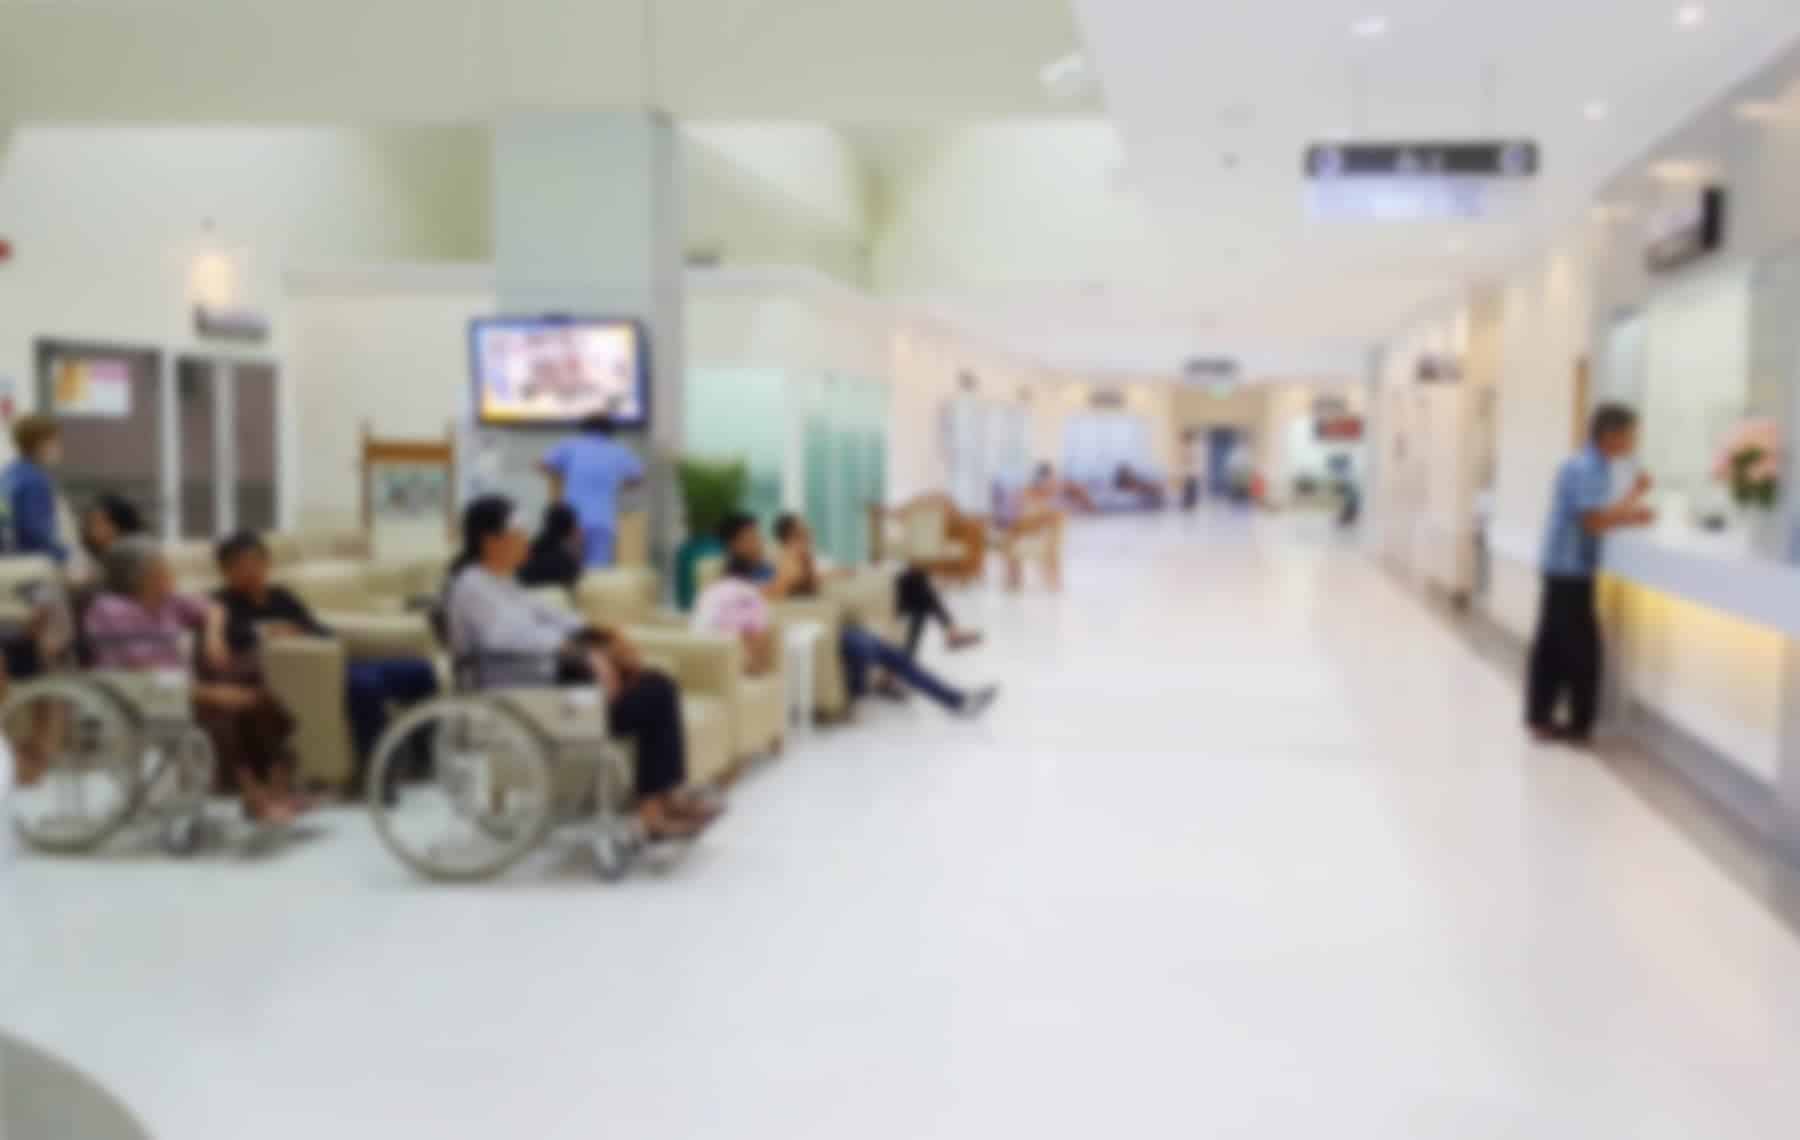 How Affordability Solutions Can Break the Vicious Cycle of Patient Collections